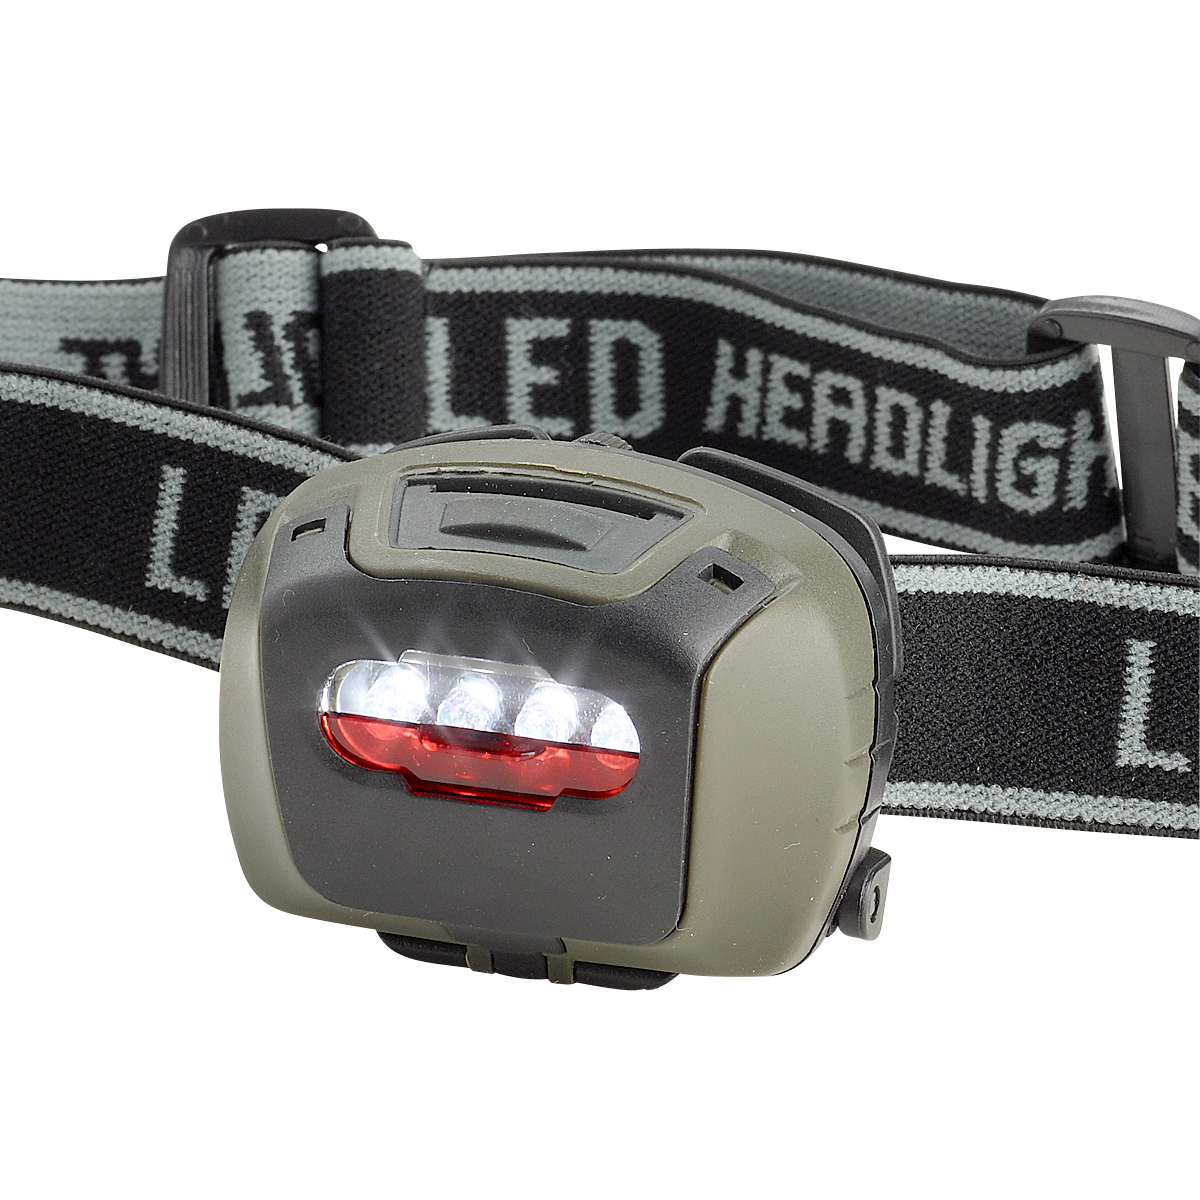 4 LED Headlamp with 3 interchangeable lenses 